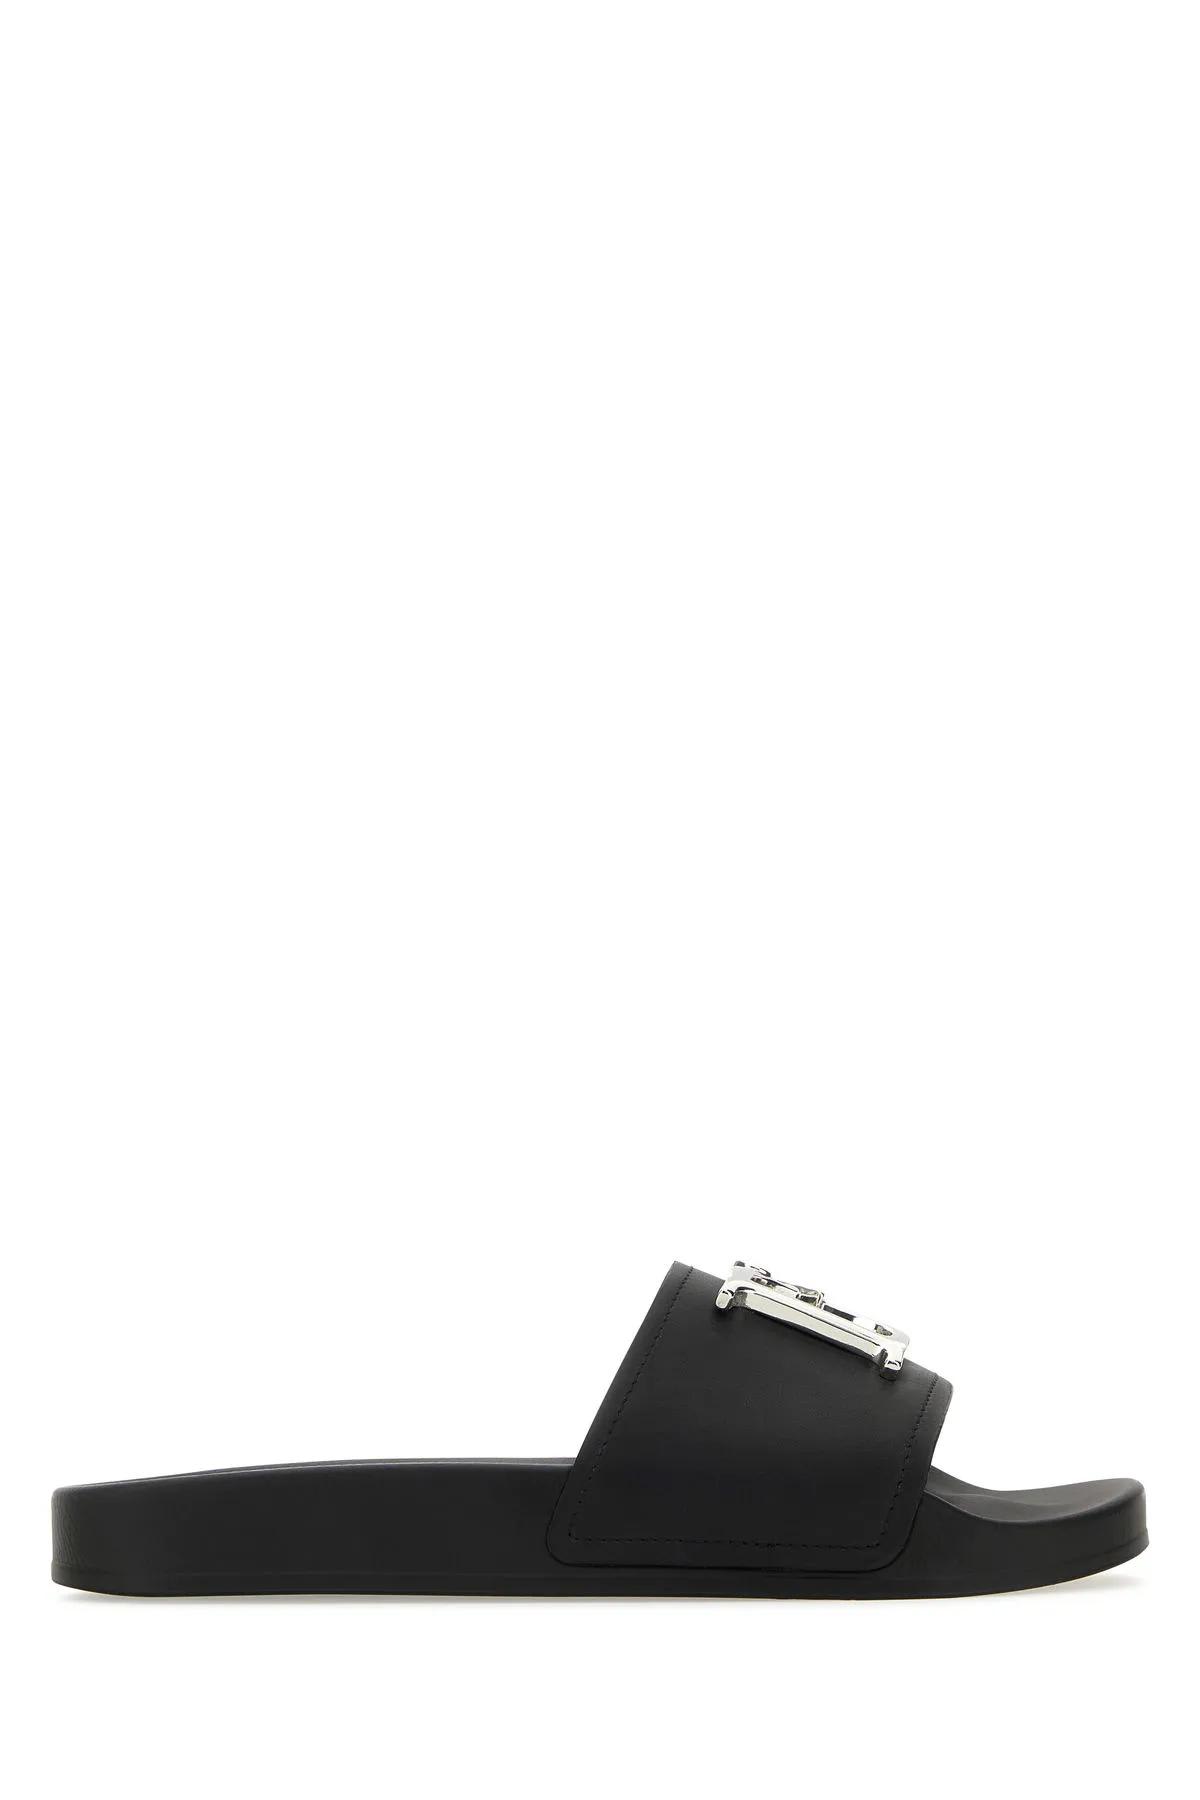 Dsquared2 Black Leather D2 Statement Slippers